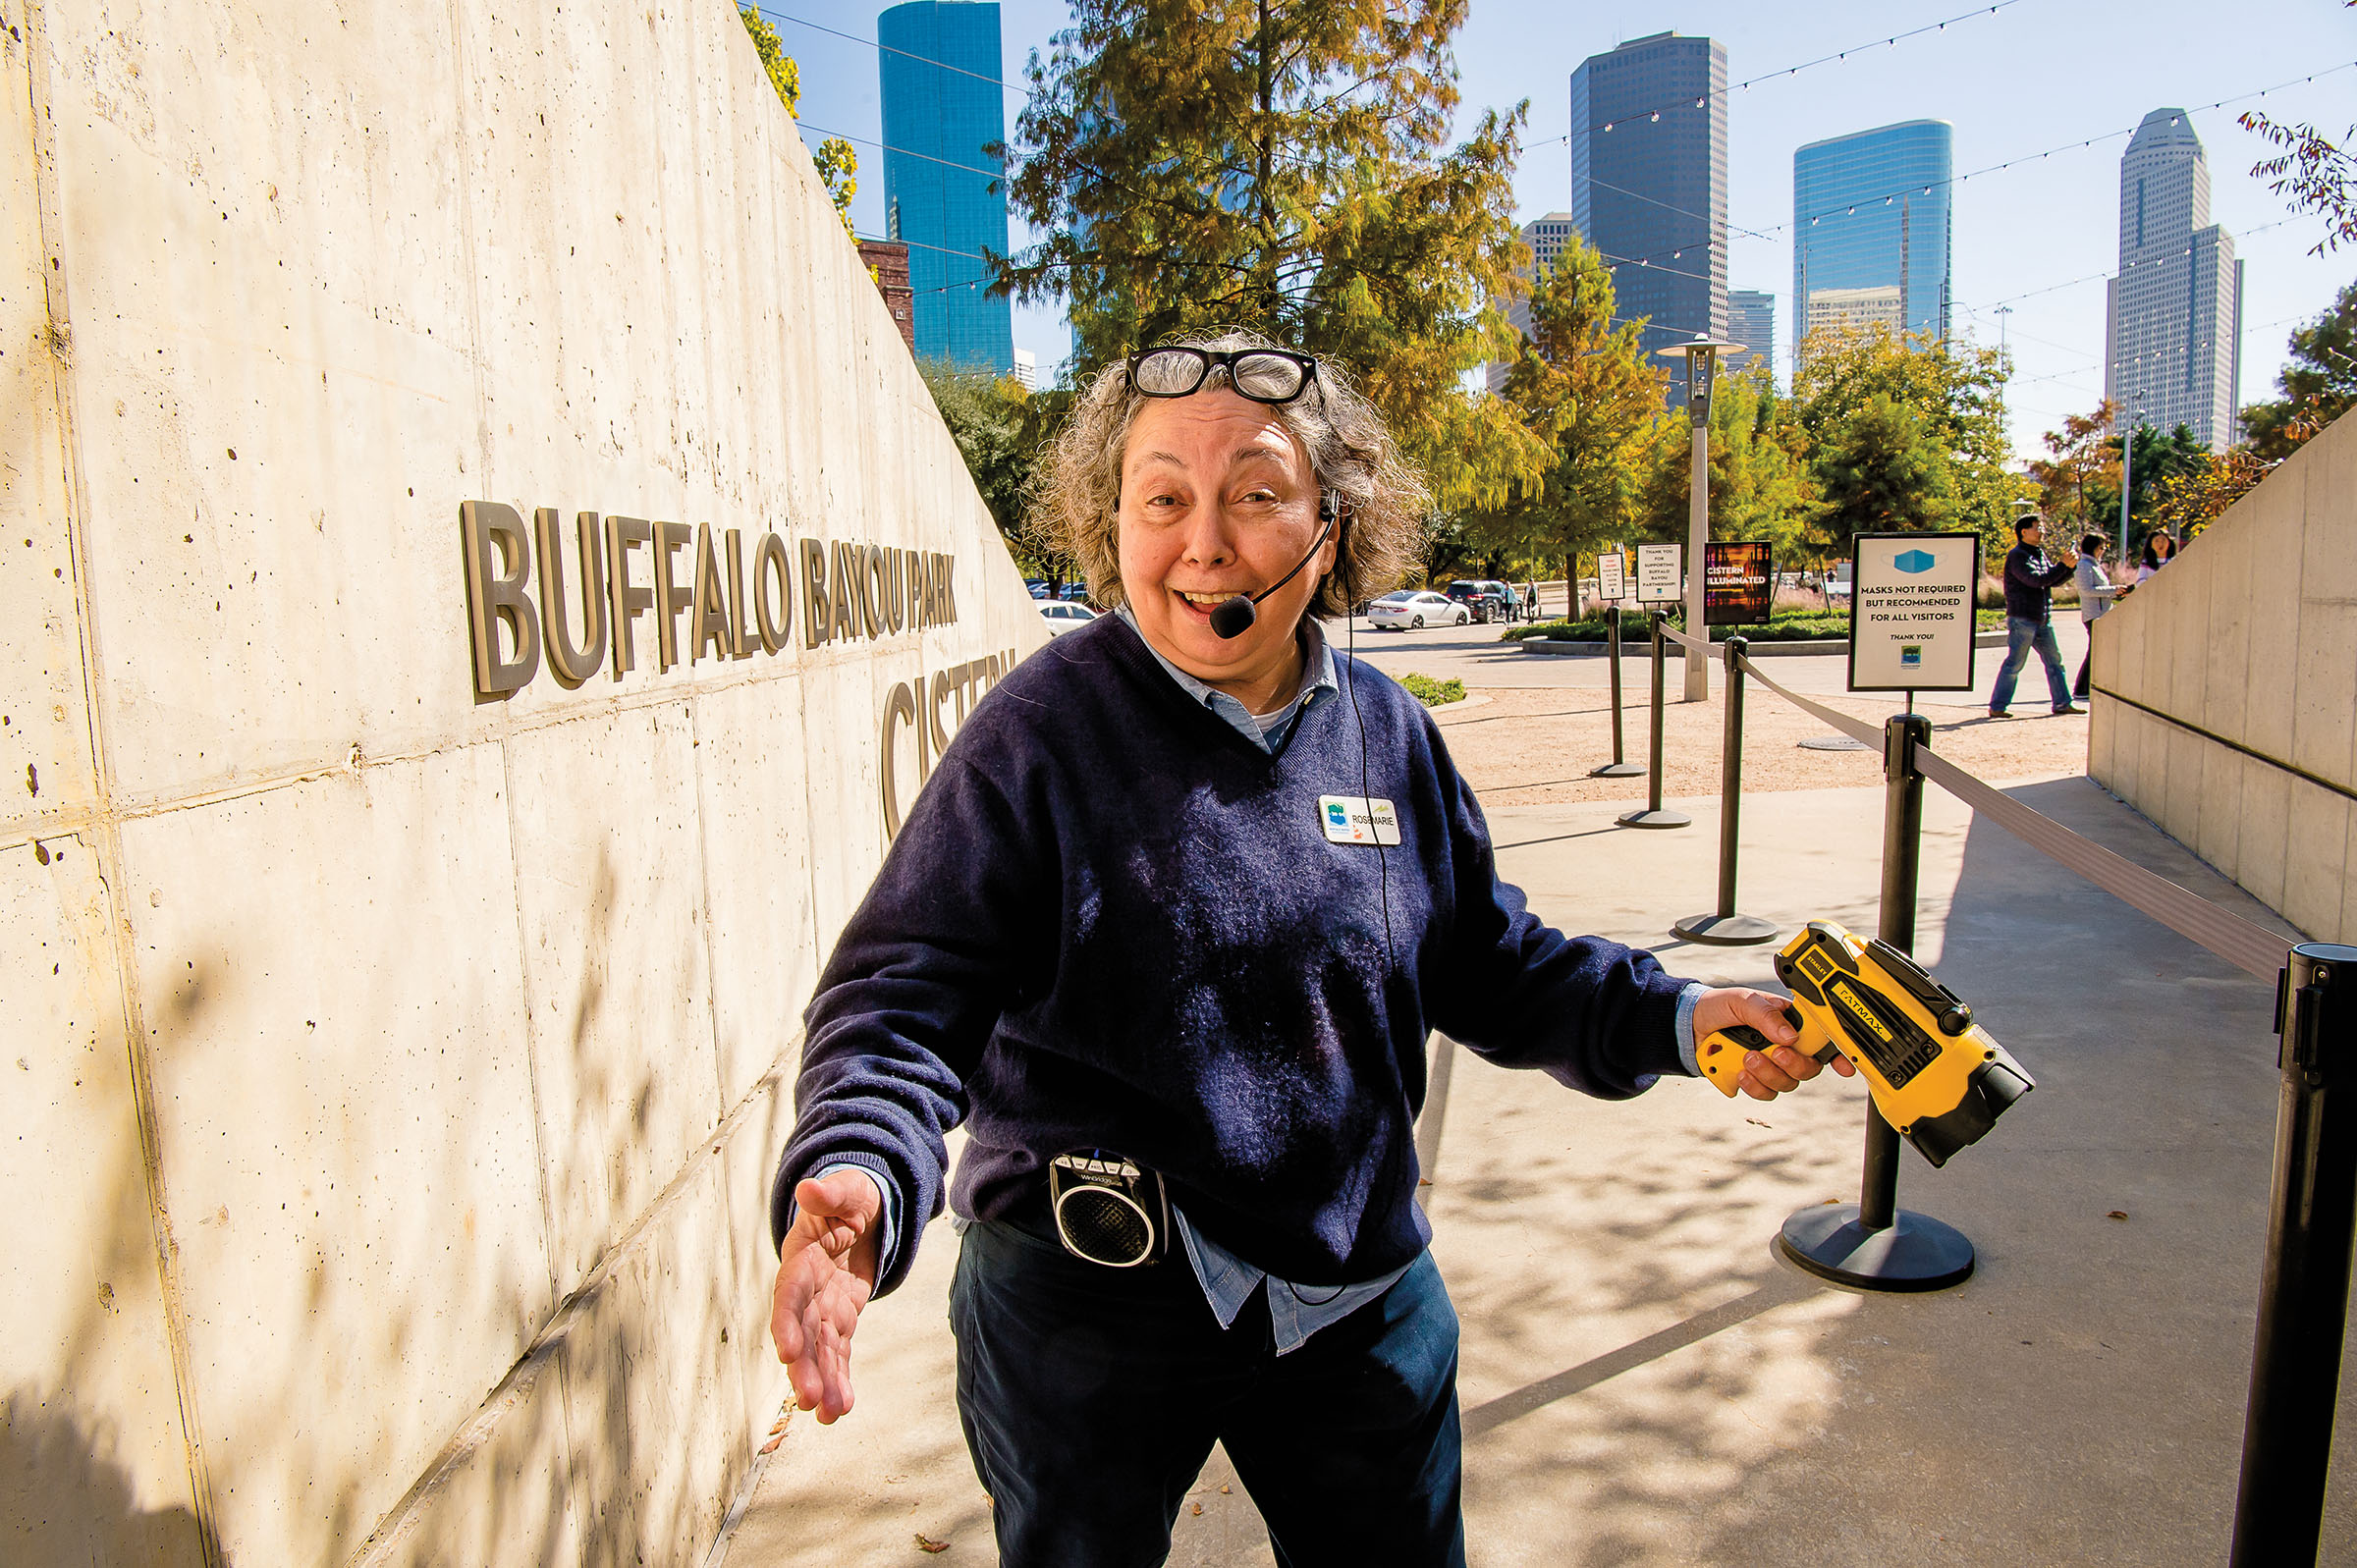 A woman in a blue sweatshirt wearing a microphone headset stands enthusiastically next to a concrete sign reading "Buffalo Bayou"